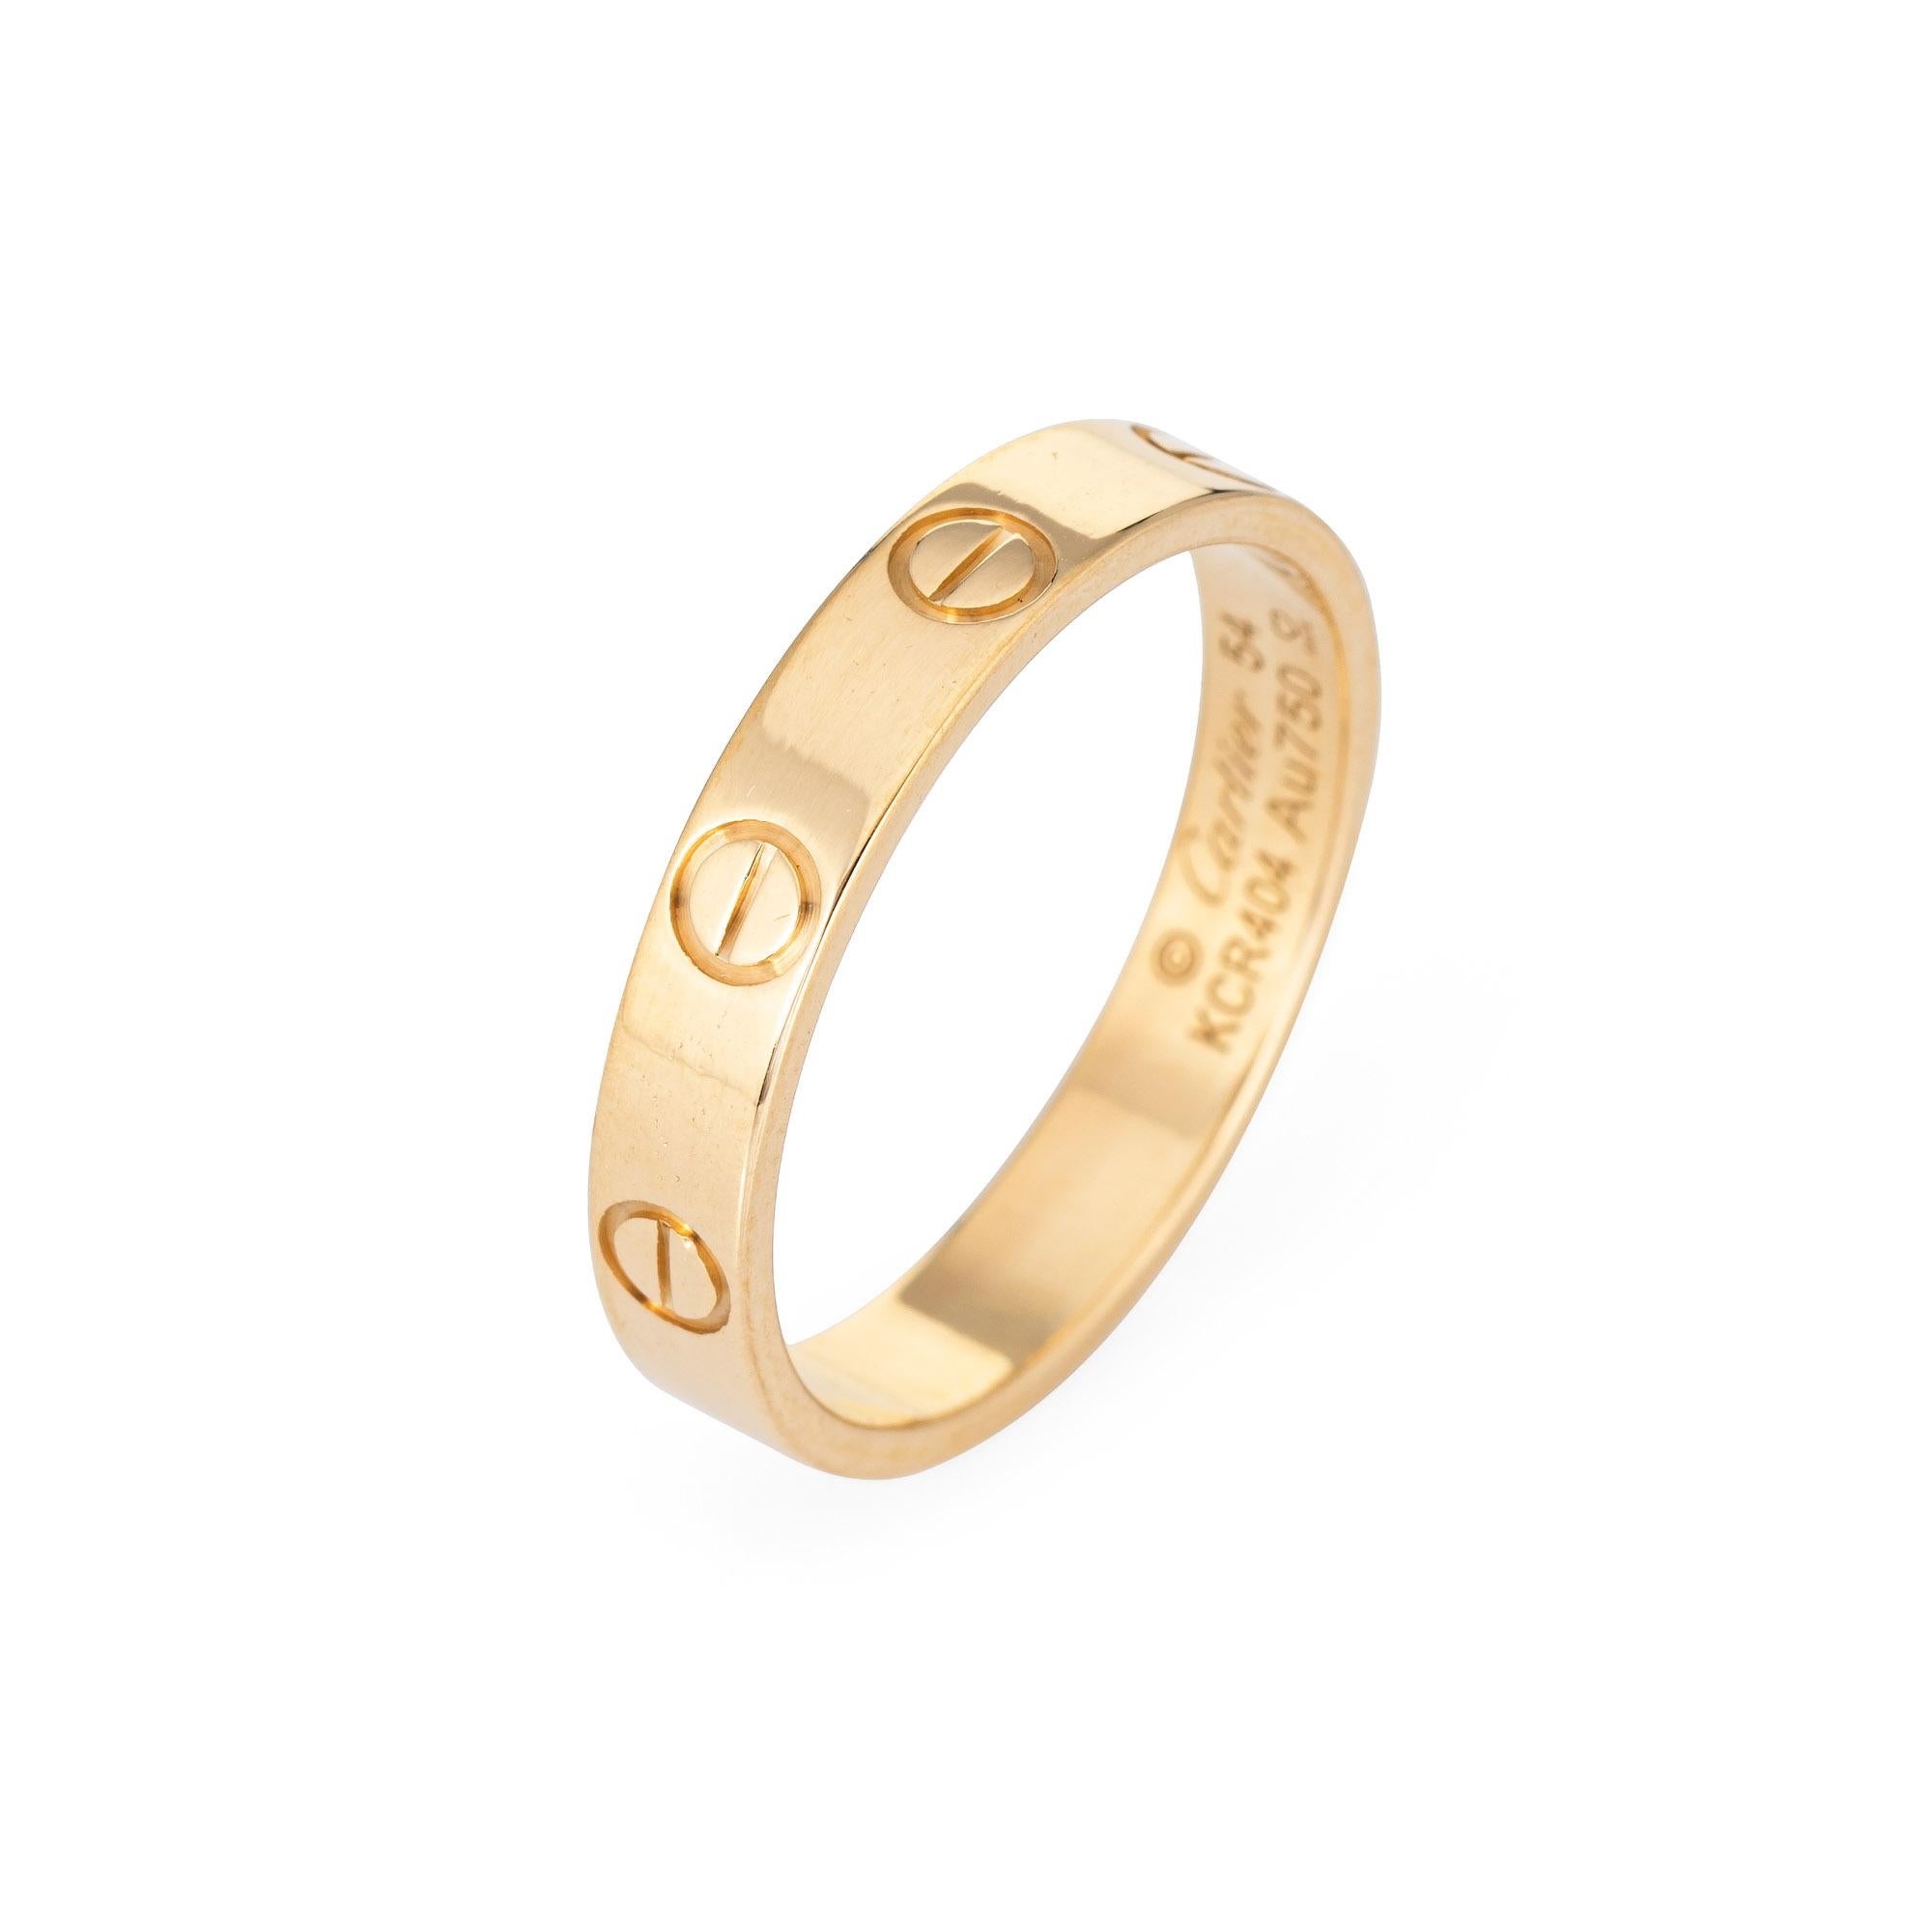 Cartier LOVE wedding band crafted in 18k yellow gold (current collection).  

The iconic Cartier ring features the classic screw motif to a 3.6mm wide band.  The ring is great worn alone or layered with your fine jewelry from any era. 

The ring is